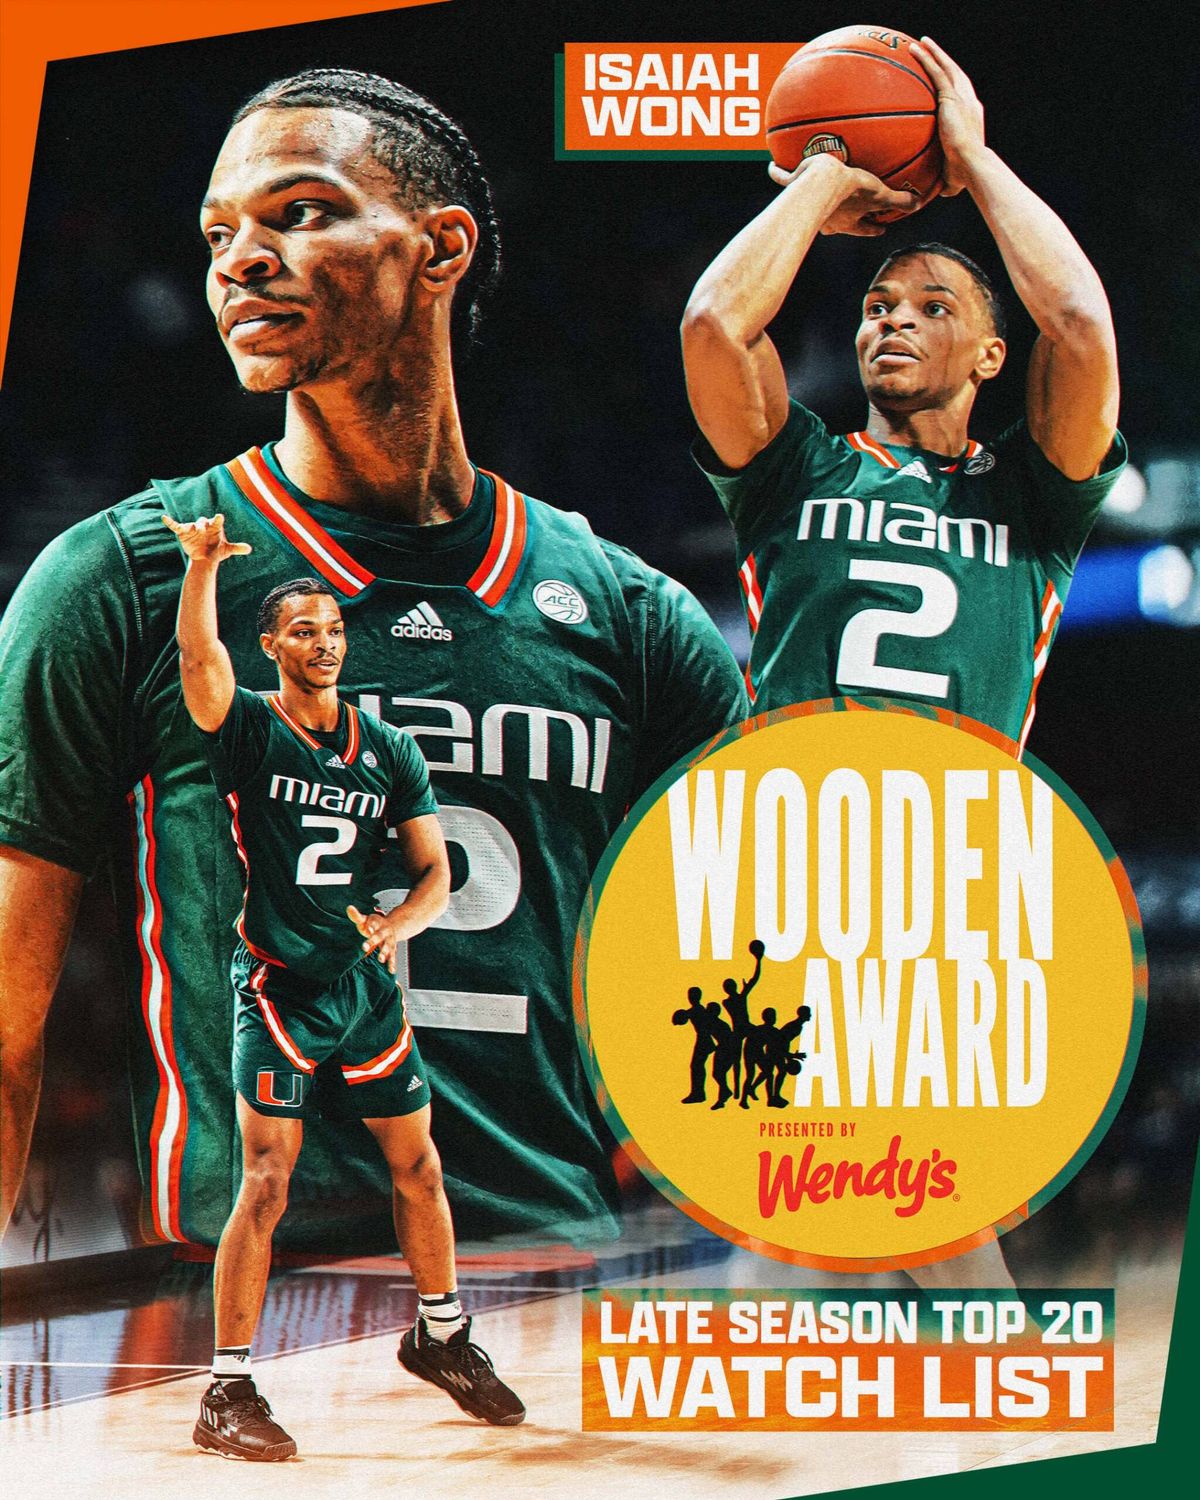 Wong Tabbed to Wooden Award Late Season Top 20 Watch List